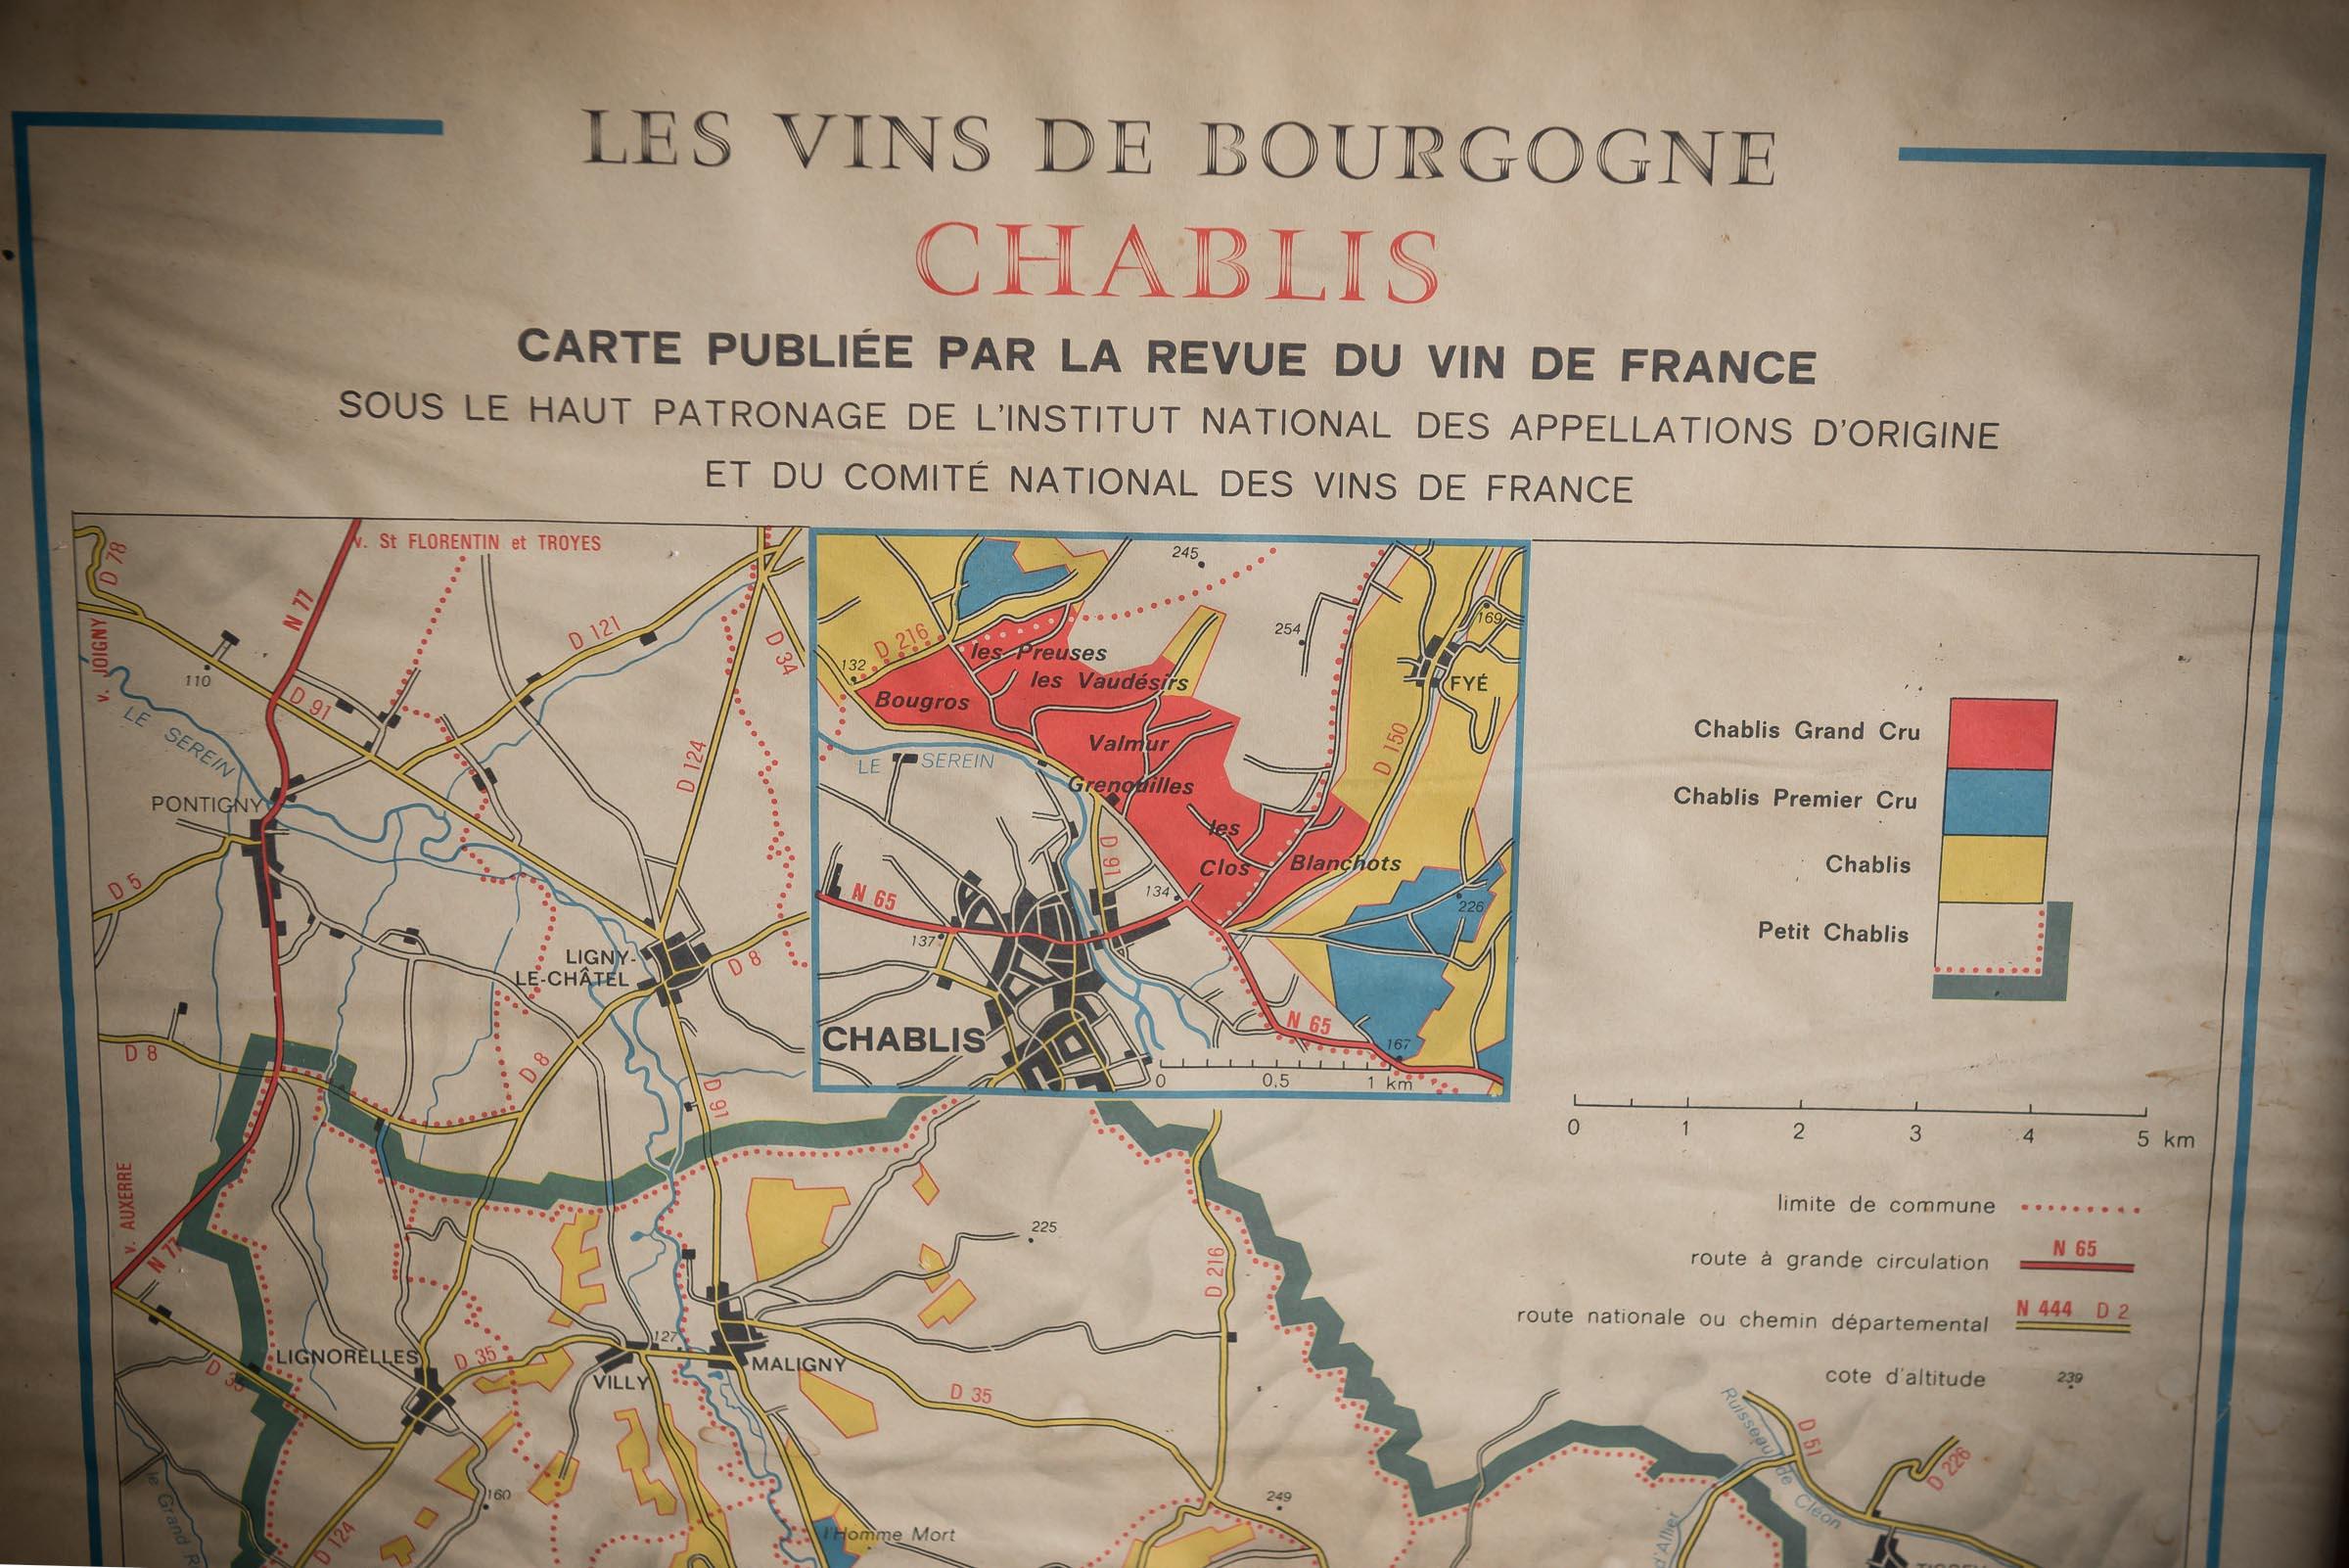 Framed Chablis region wine map from 1972 depicting the wine regions of Bourgogne. The print has been removed to clean the glass, the frame has minor damage in places but nothing that detracts from its beauty, if anything this 'wear and tear' only